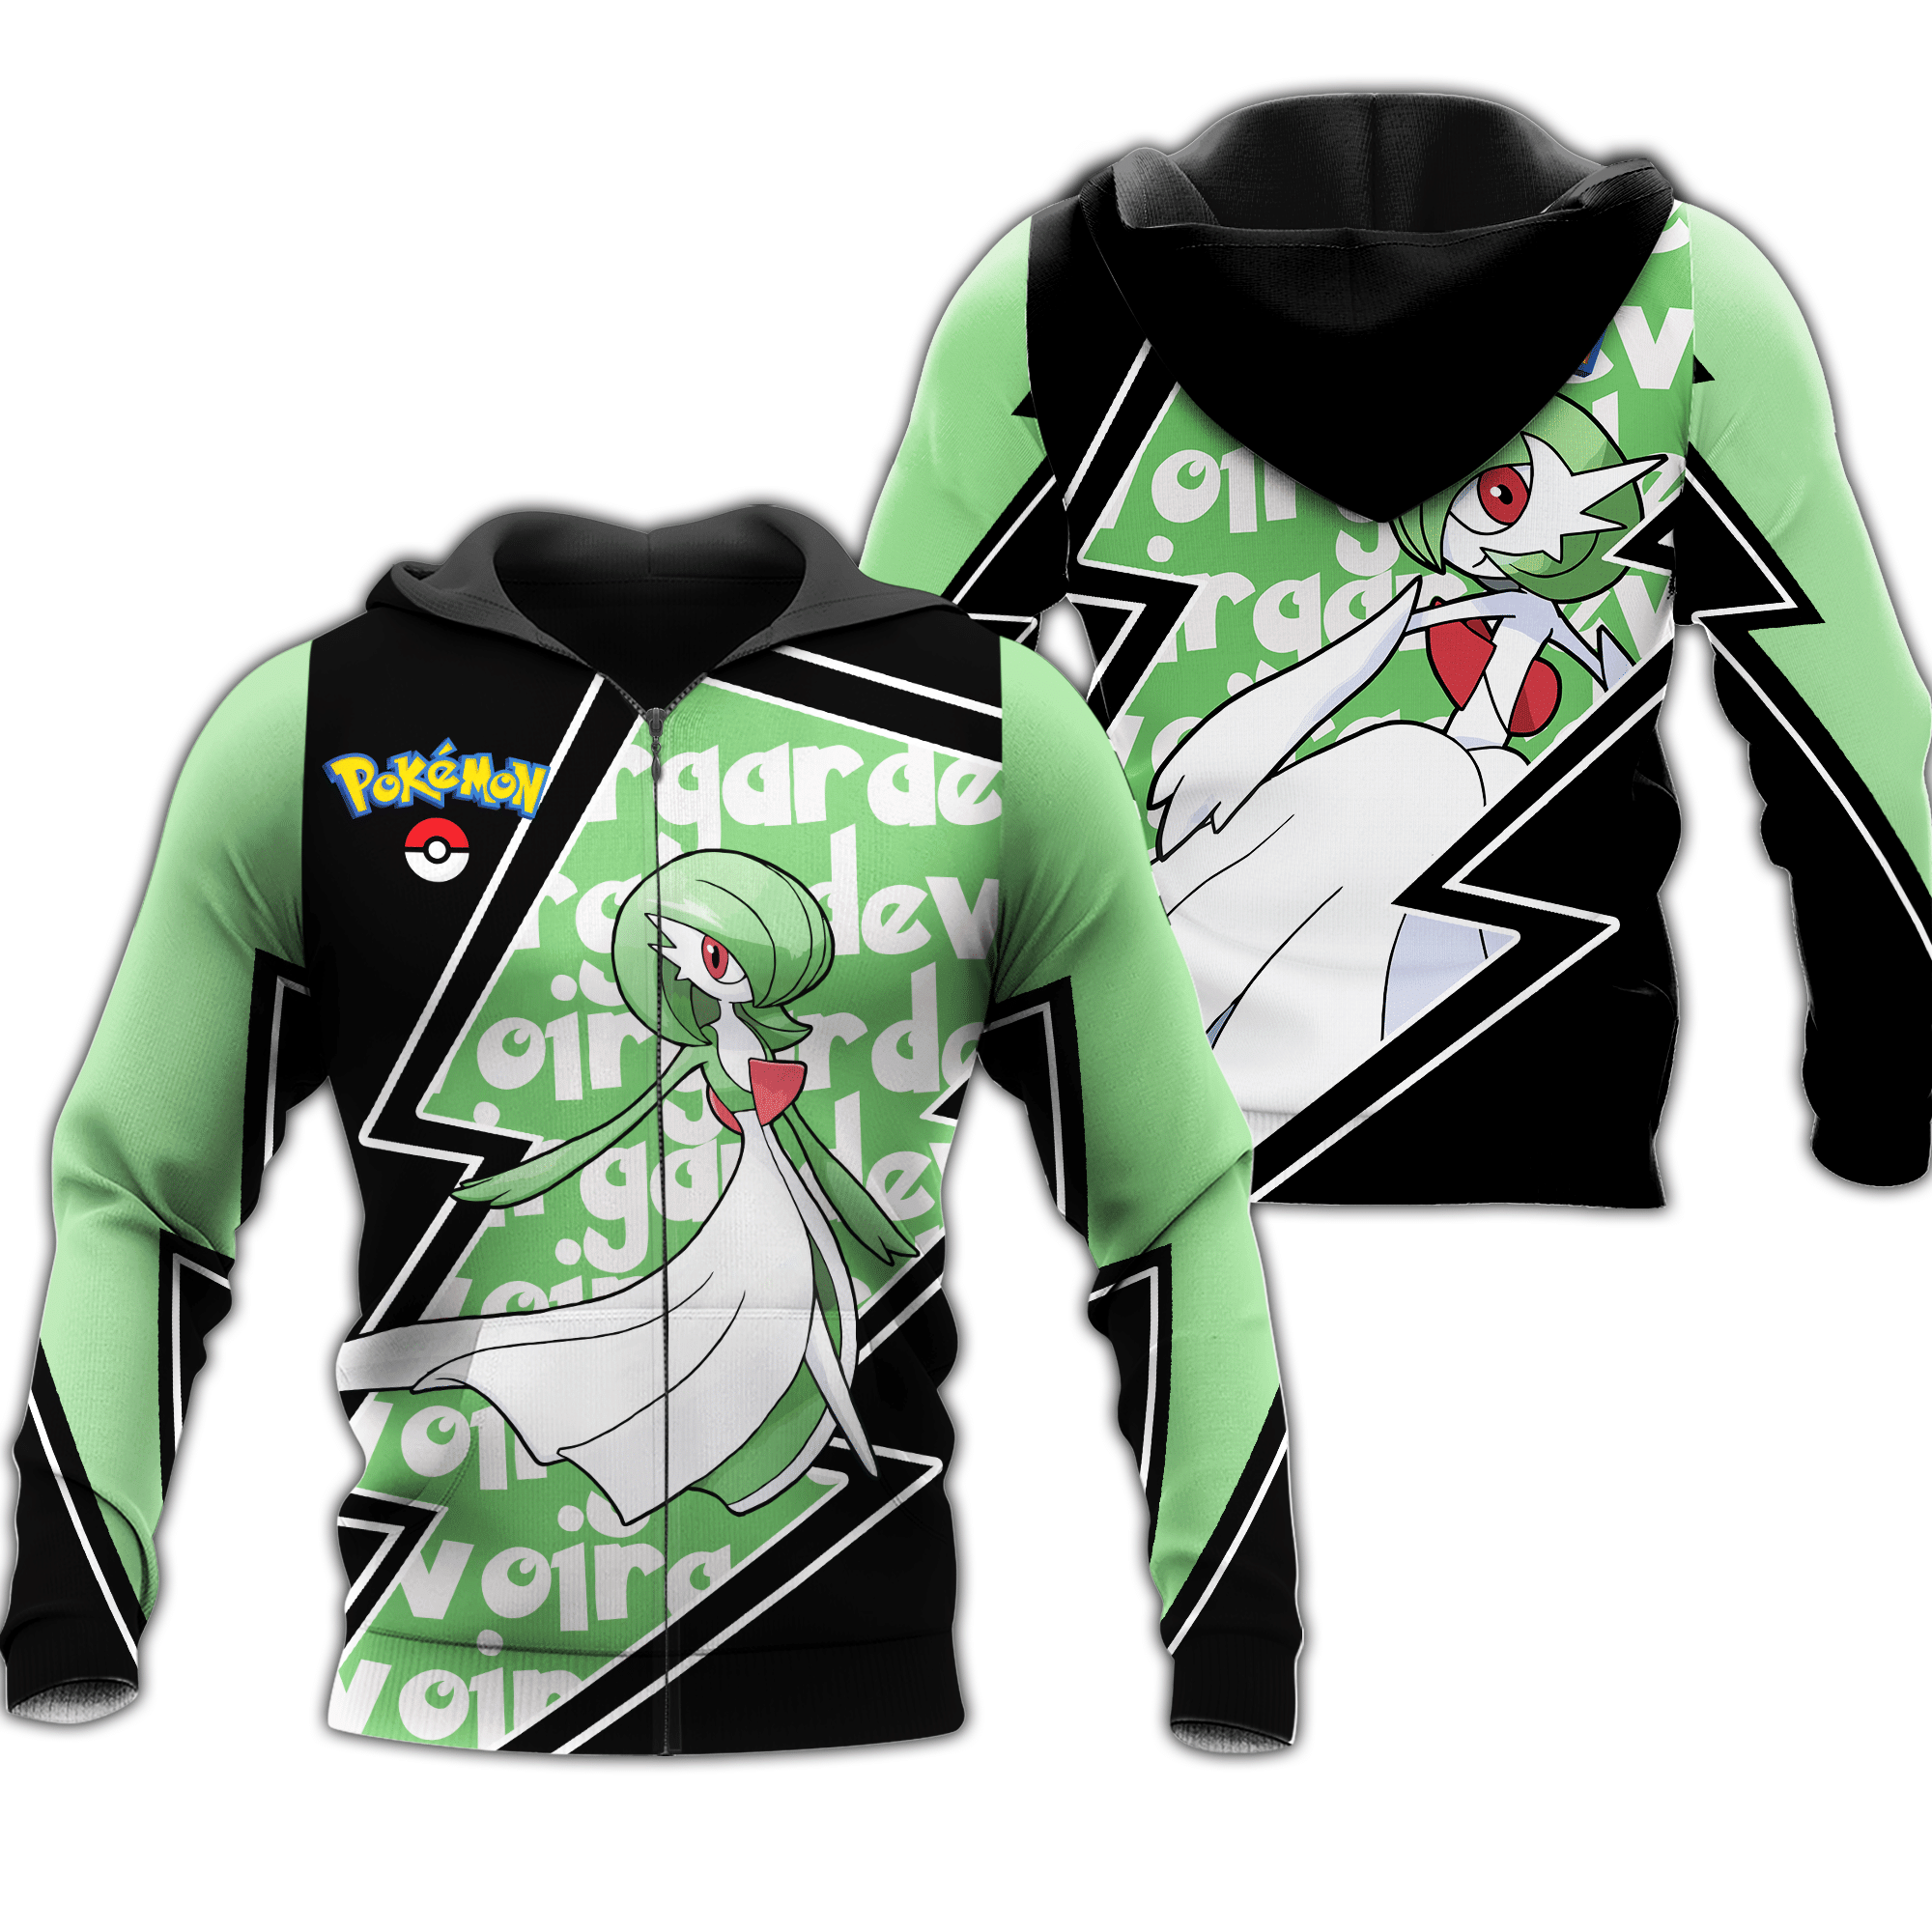 Gardevoir Zip All Over Printed 3D Shirt Costume Pokemon Fan Gift Idea Product Photo 1 Product photo 1